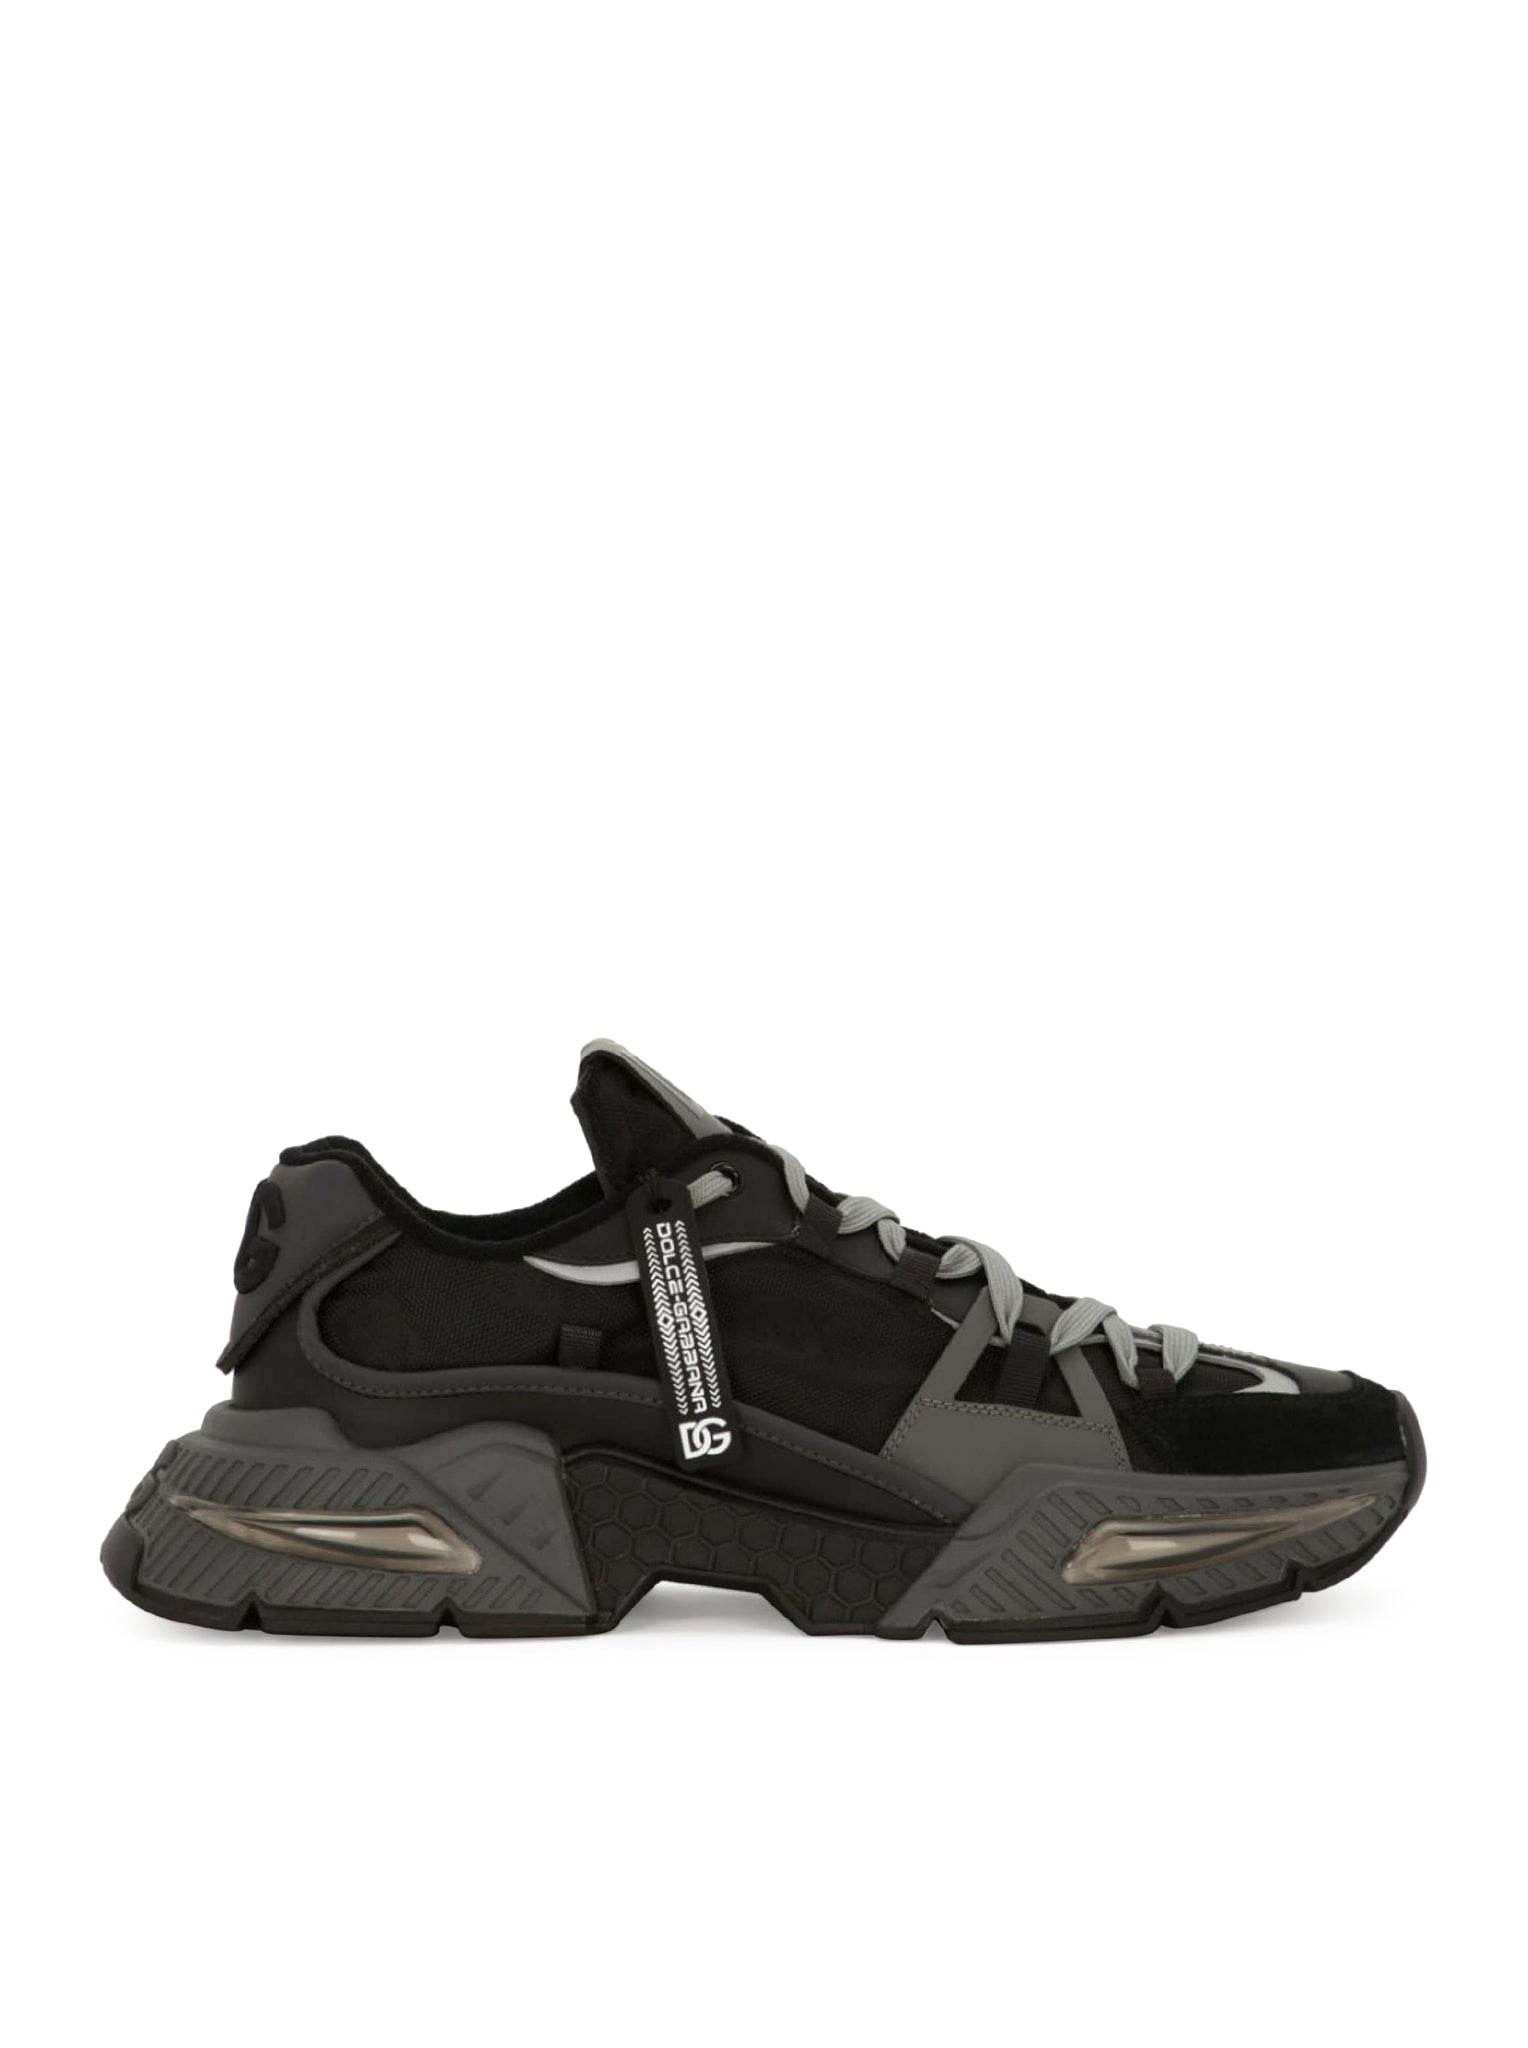 Airmaster chunky sneakers